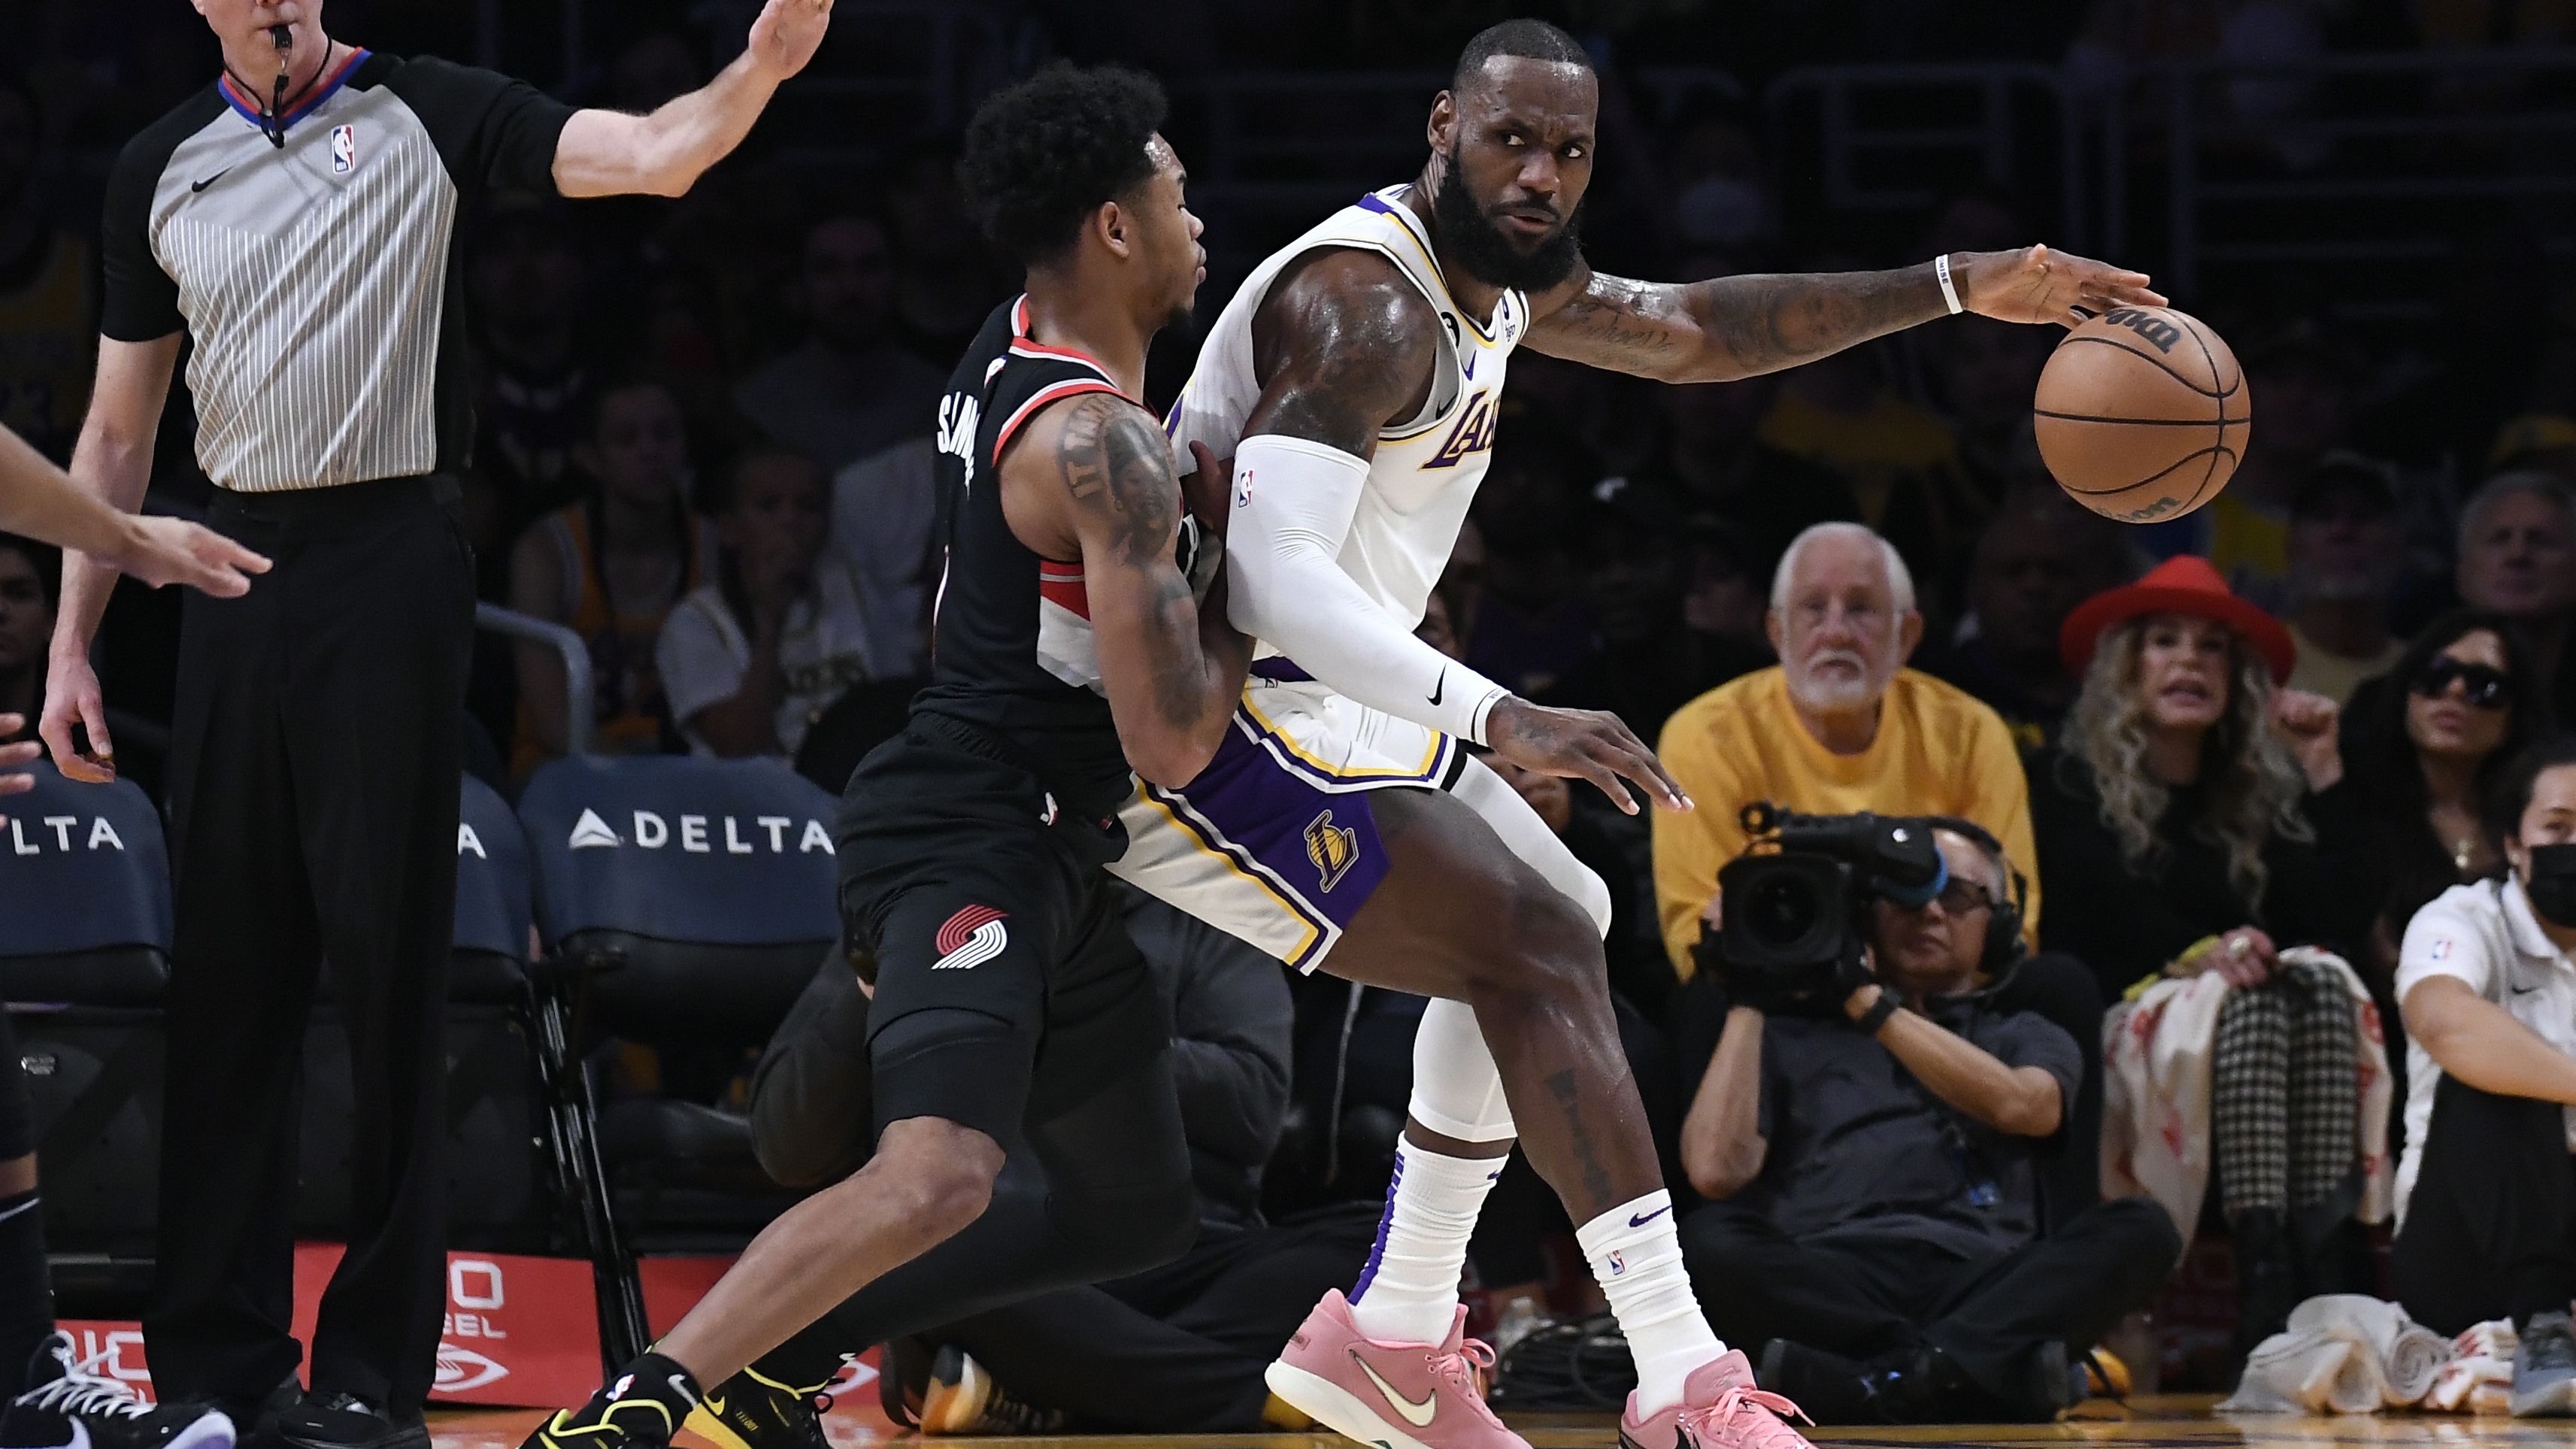 "I thought we did a great job of giving ourselves a chance to win, we just have to tighten up," Lakers head coach Darvin Ham said after the game.